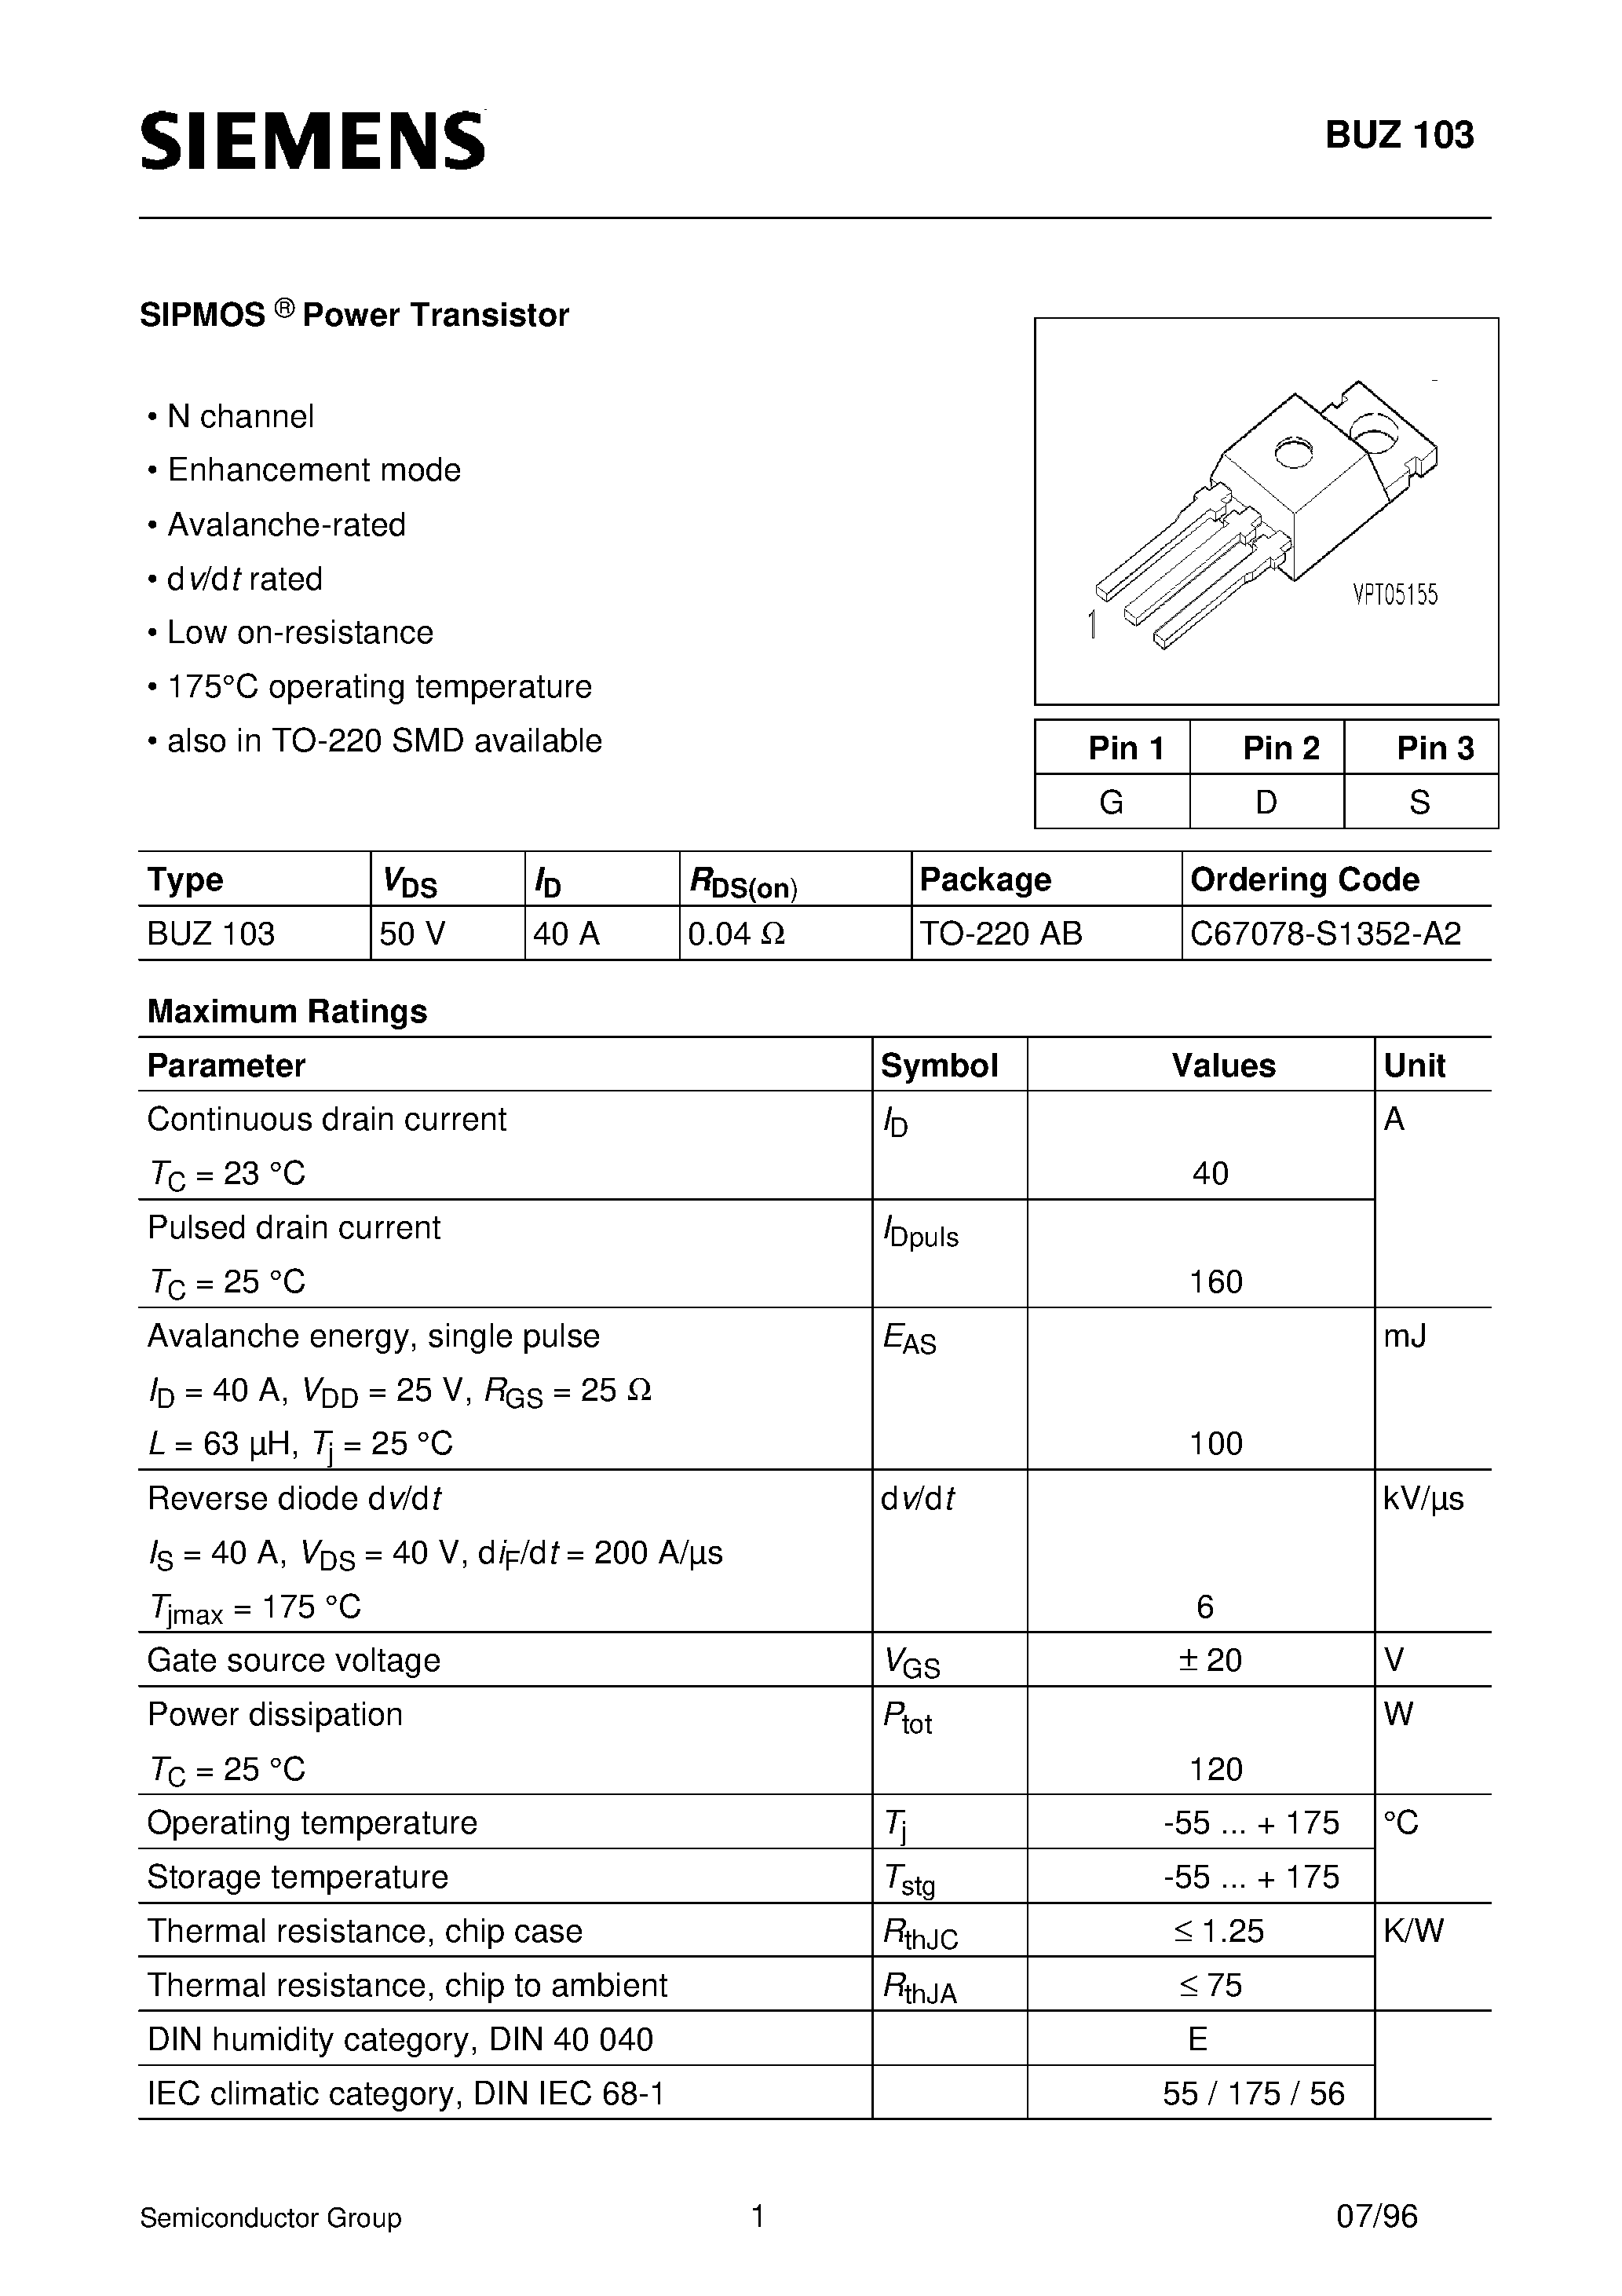 Datasheet BUZ103 - SIPMOS Power Transistor (N channel Enhancement mode Avalanche-rated d v/d t rated Low on-resistance) page 1